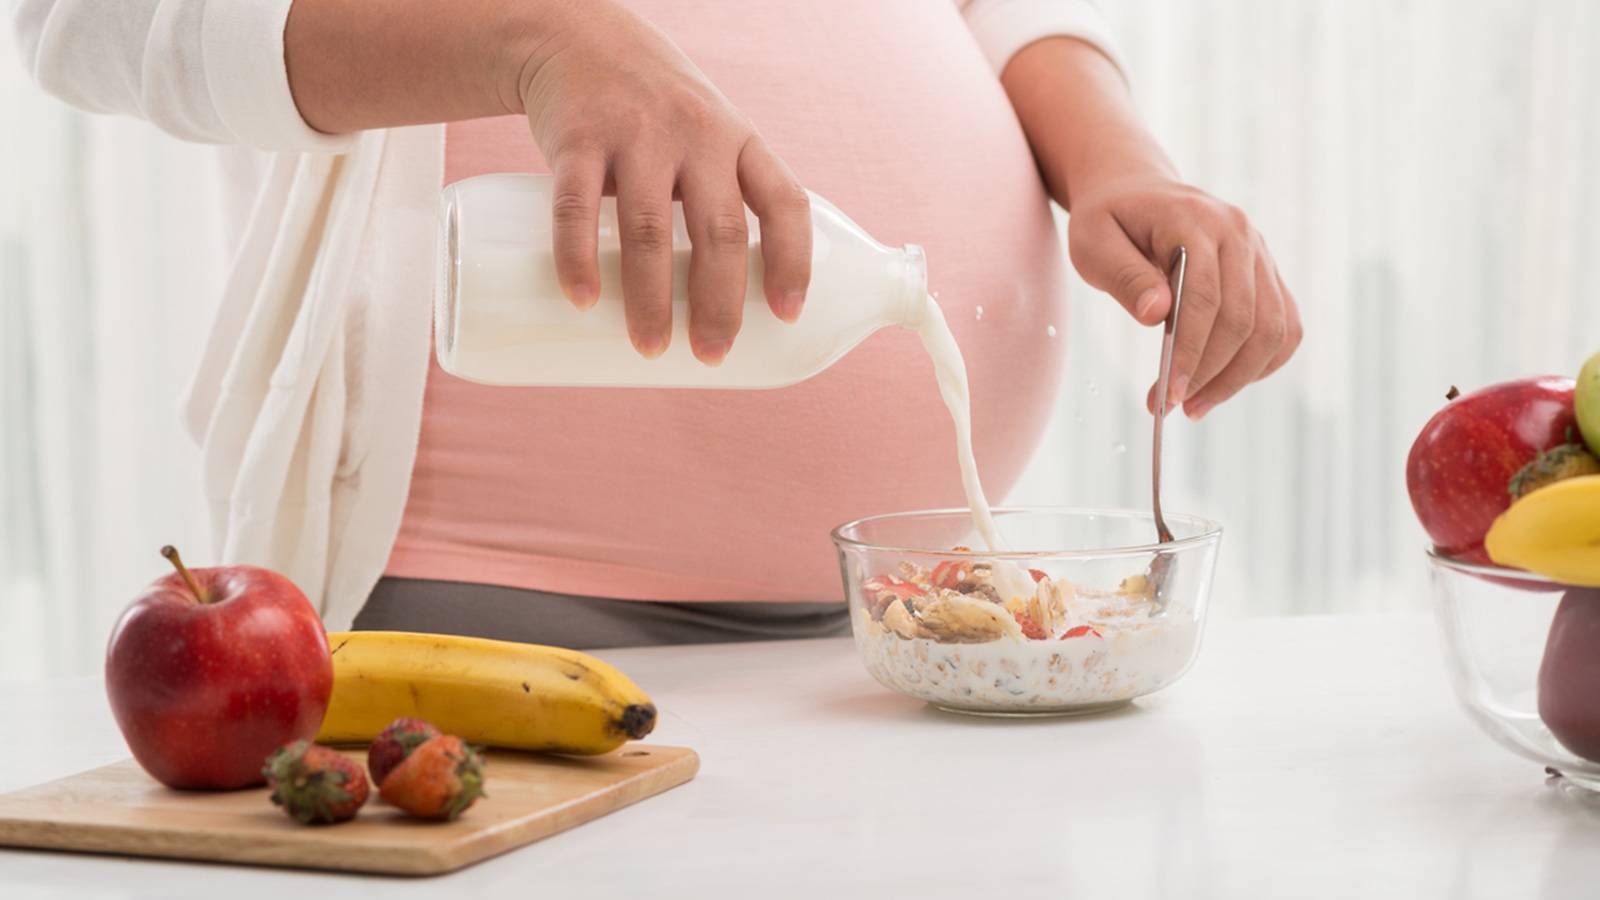 Pregnancy-(MJ-advertorial)-Pregnancy-diet-advice-What-to-eat-and-avoid-[Infographic]-1